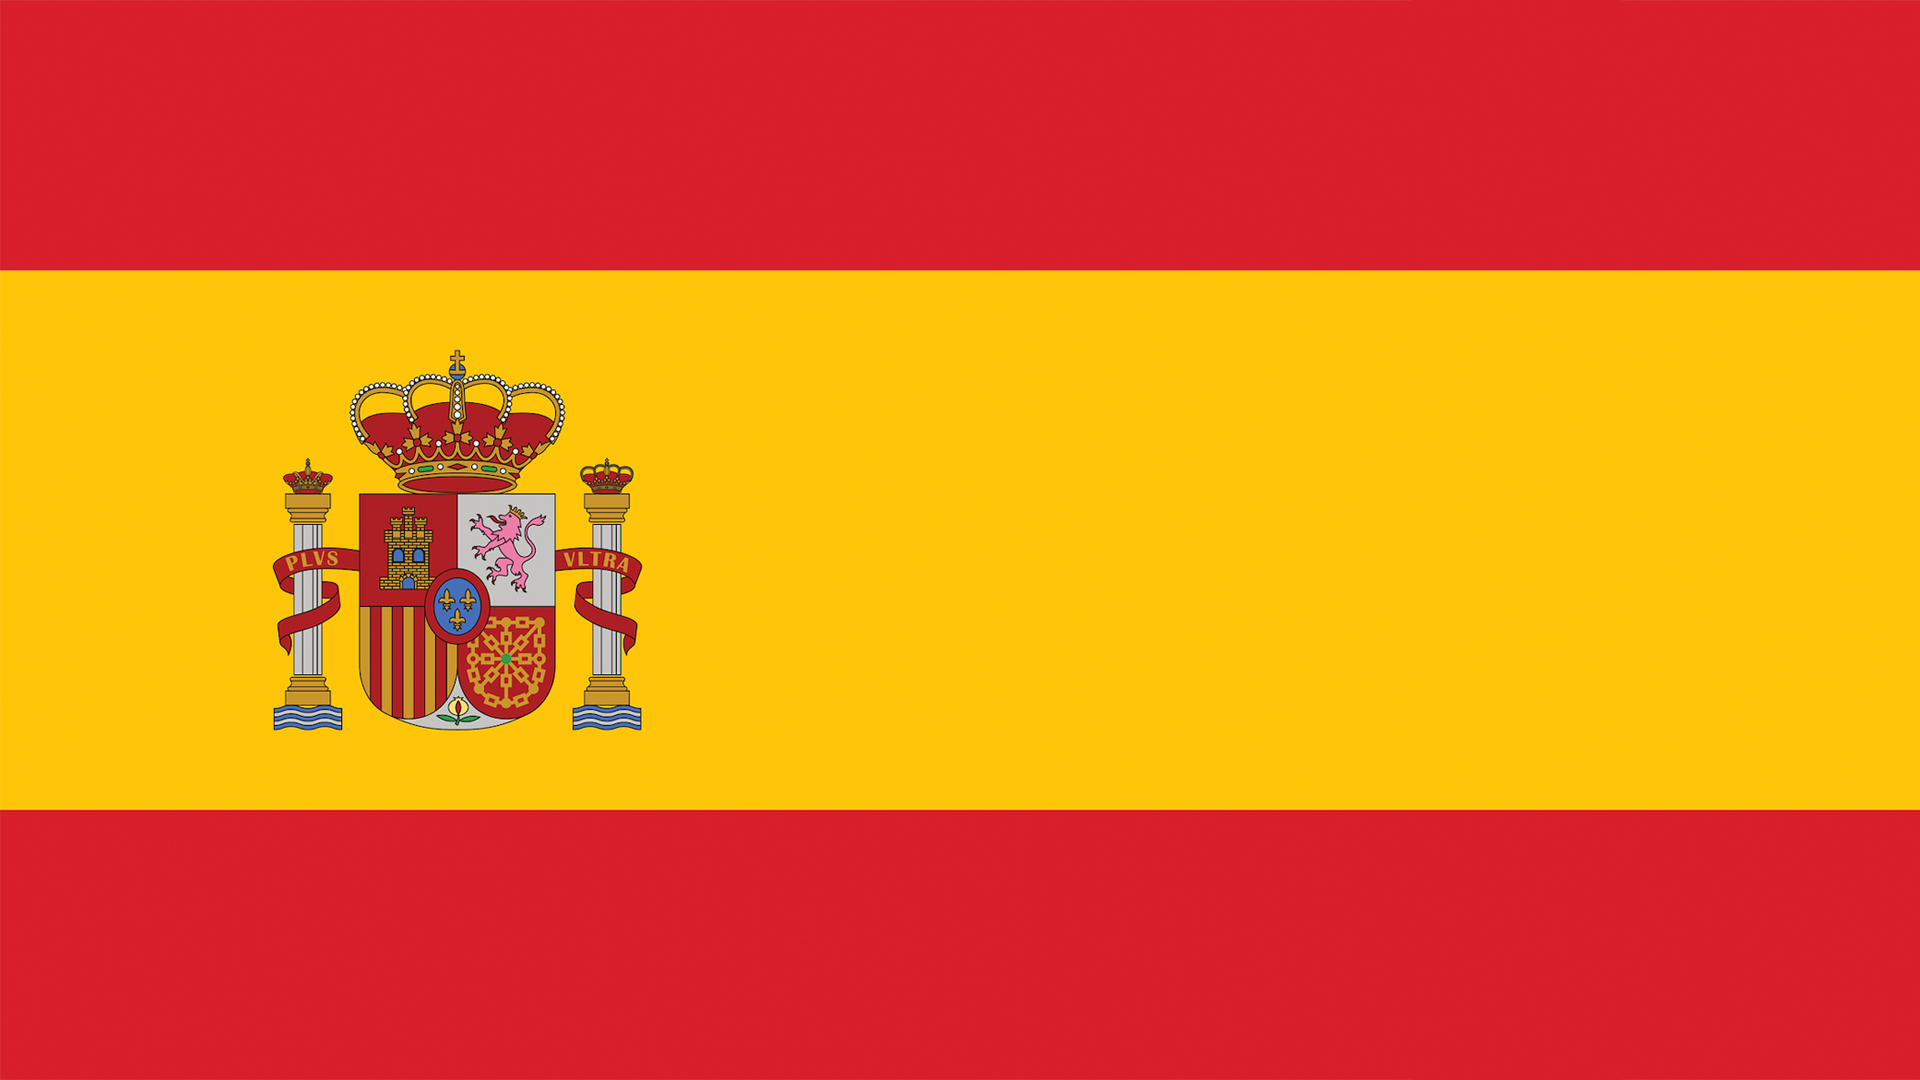 A red and yellow flag